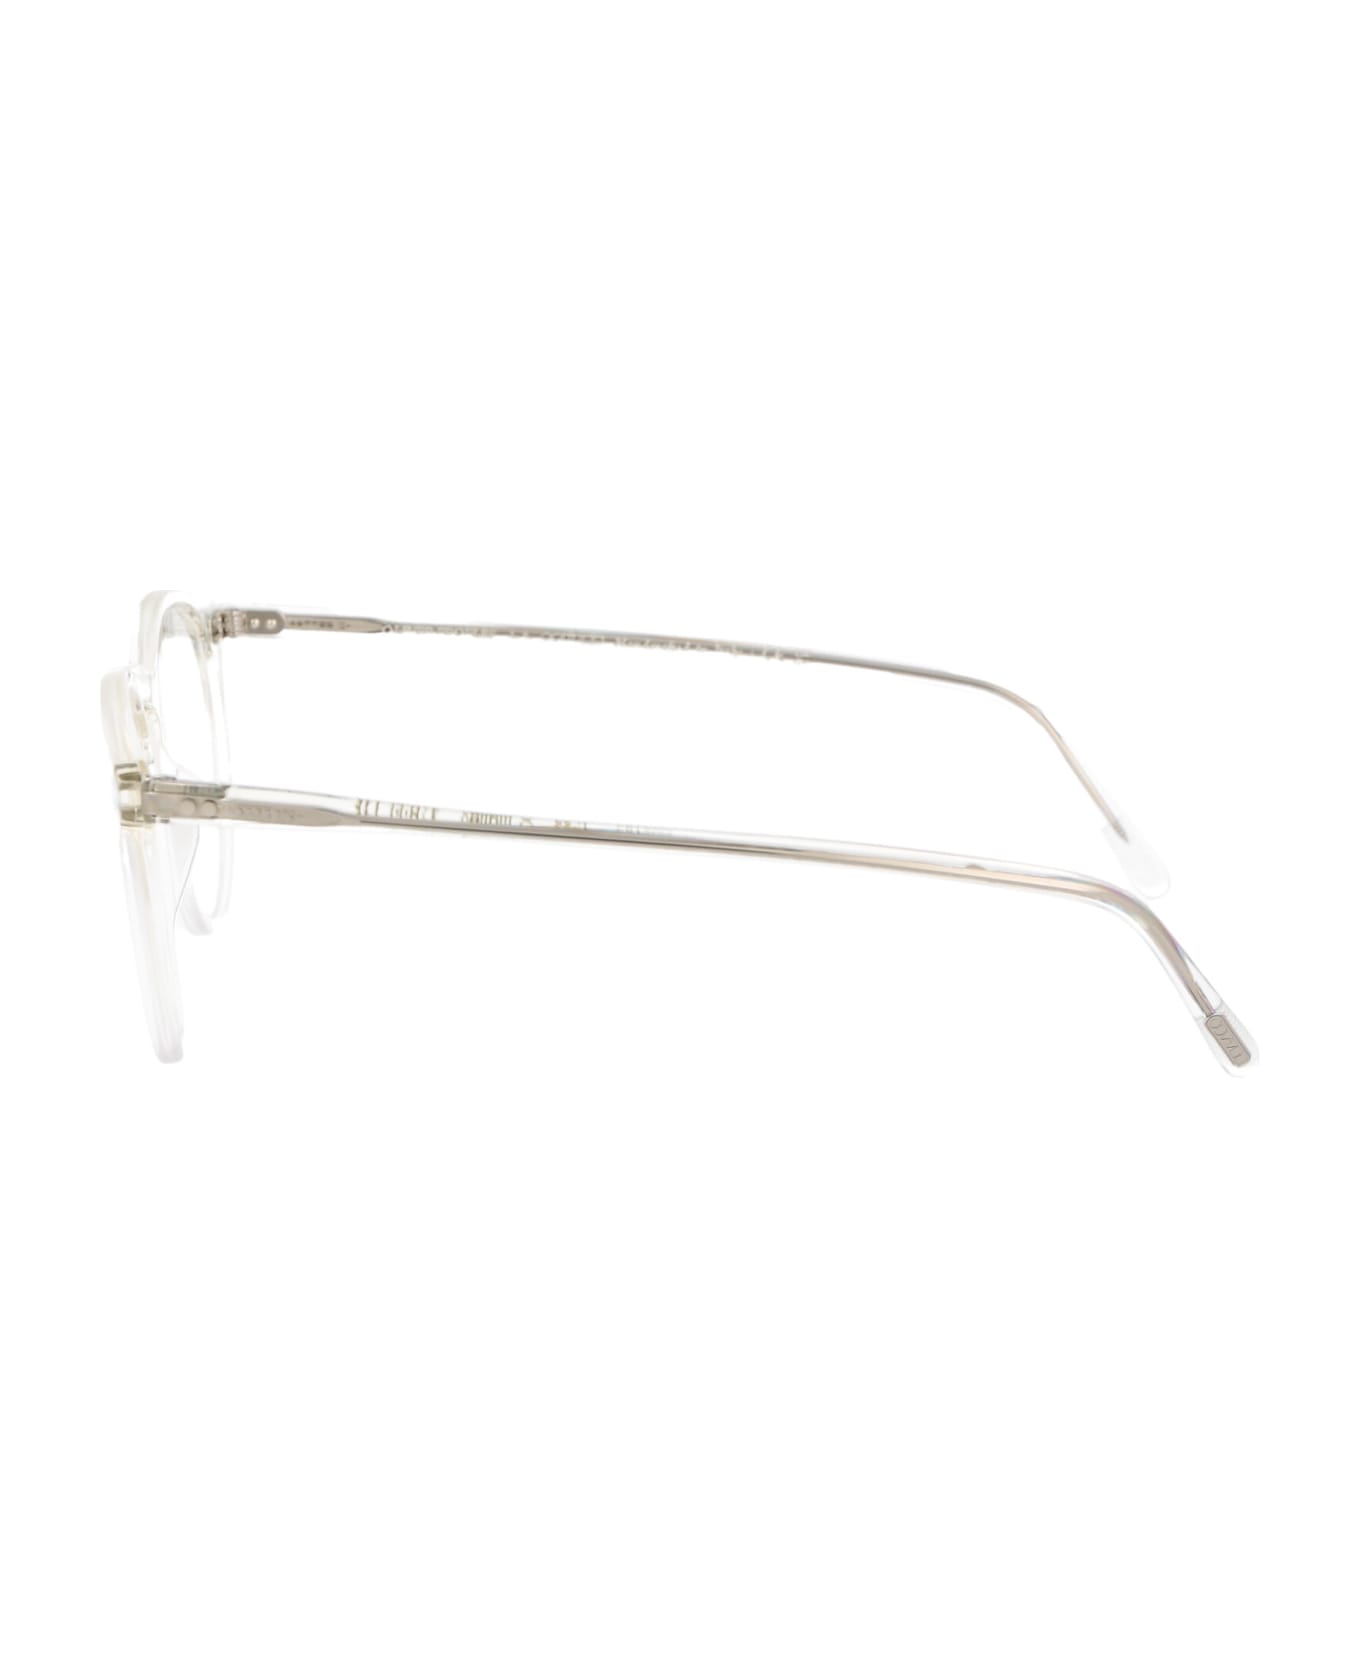 Oliver Peoples O'malley Glasses - 1755 Buff/Crystal Gradient